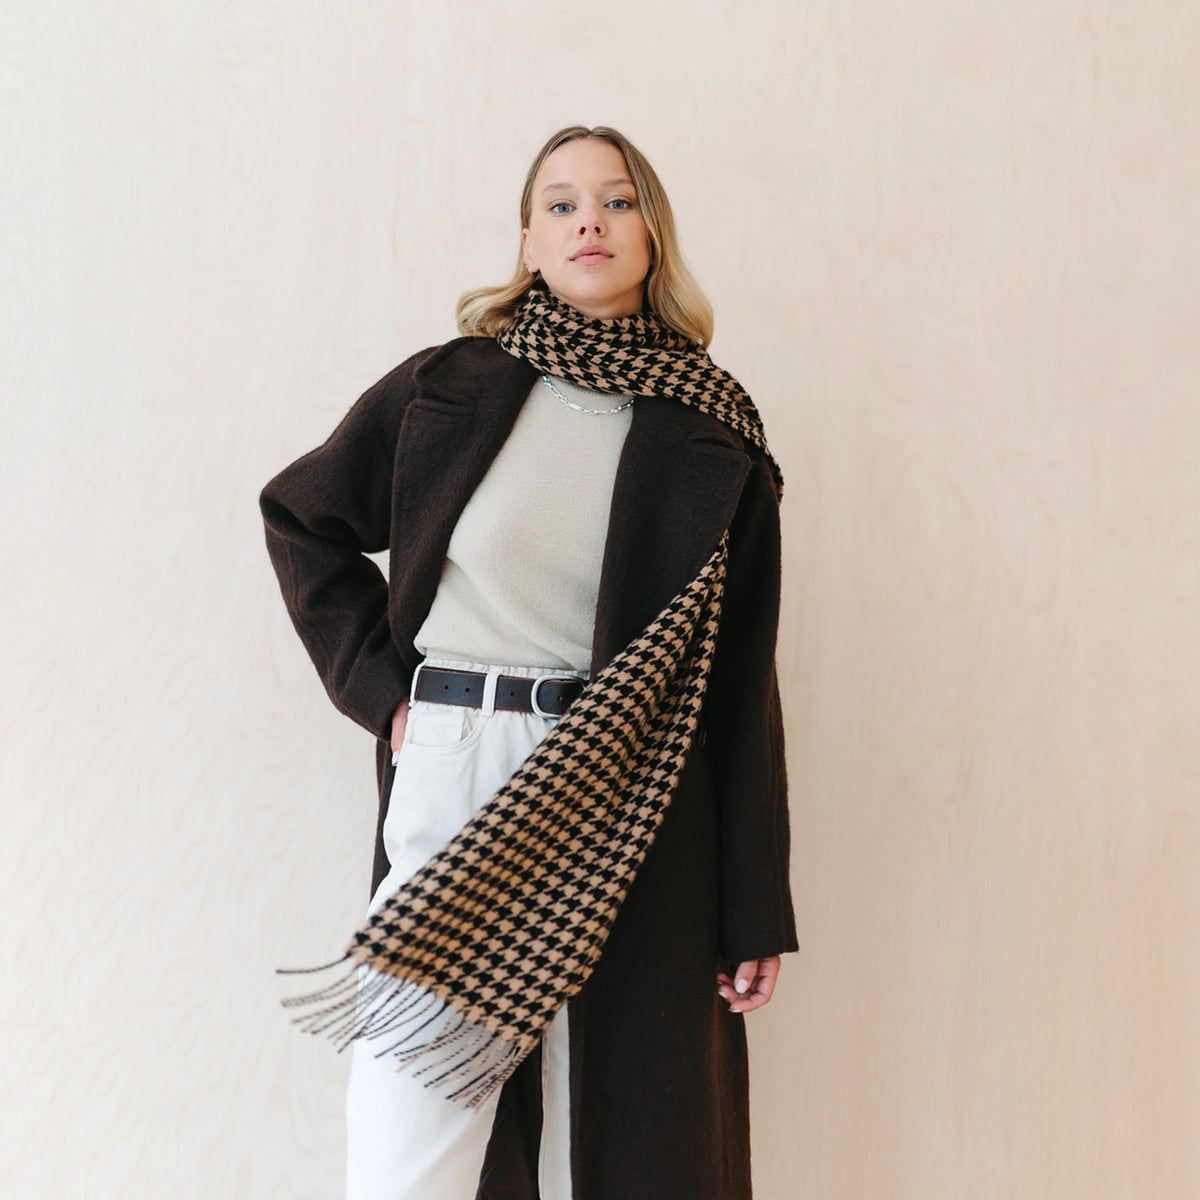 Lambswool Scarf in Houndstooth